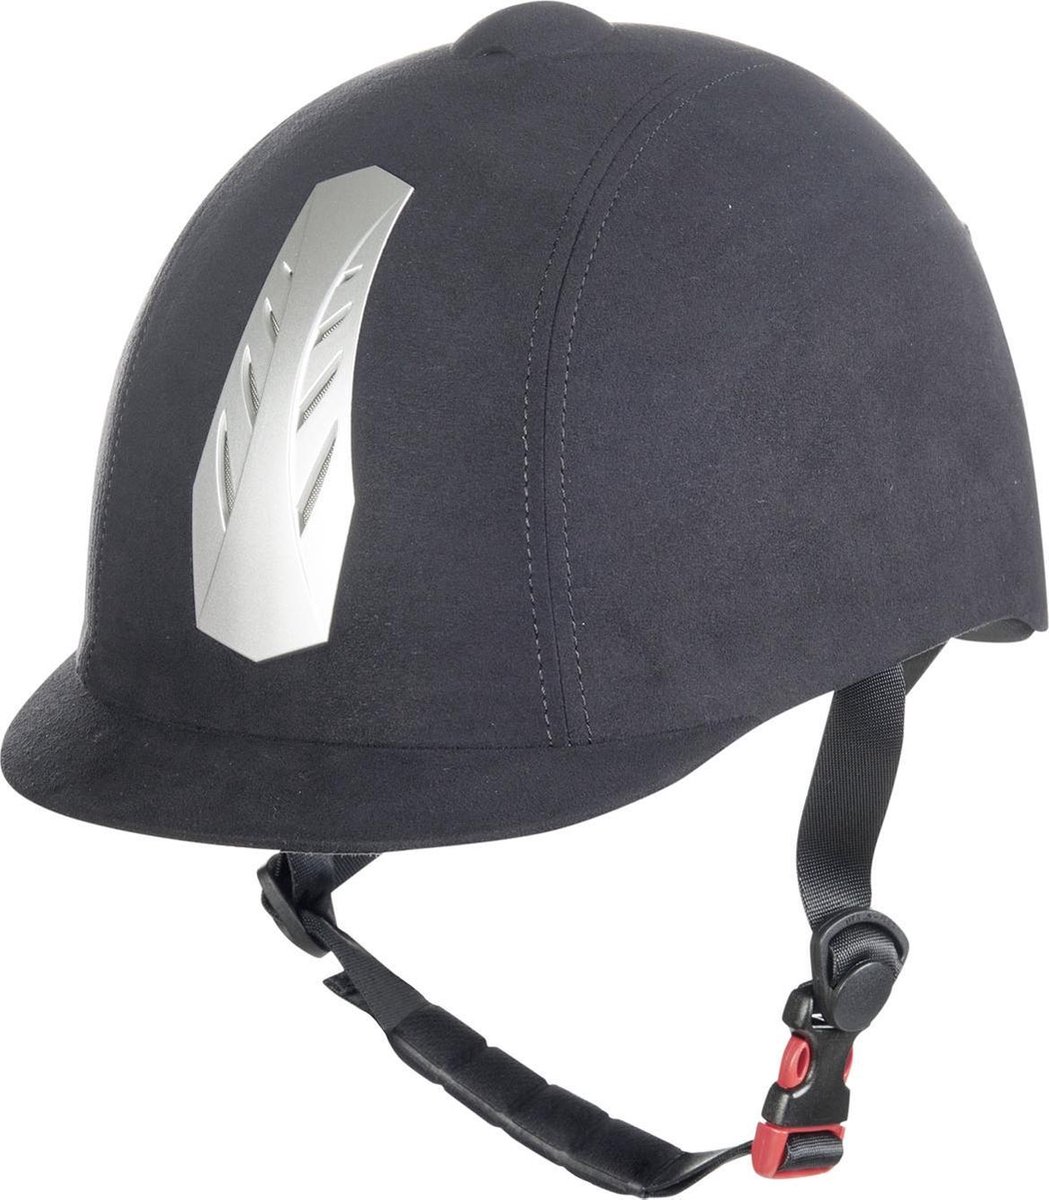 Riding helmet -New Air Stripe- with dial system